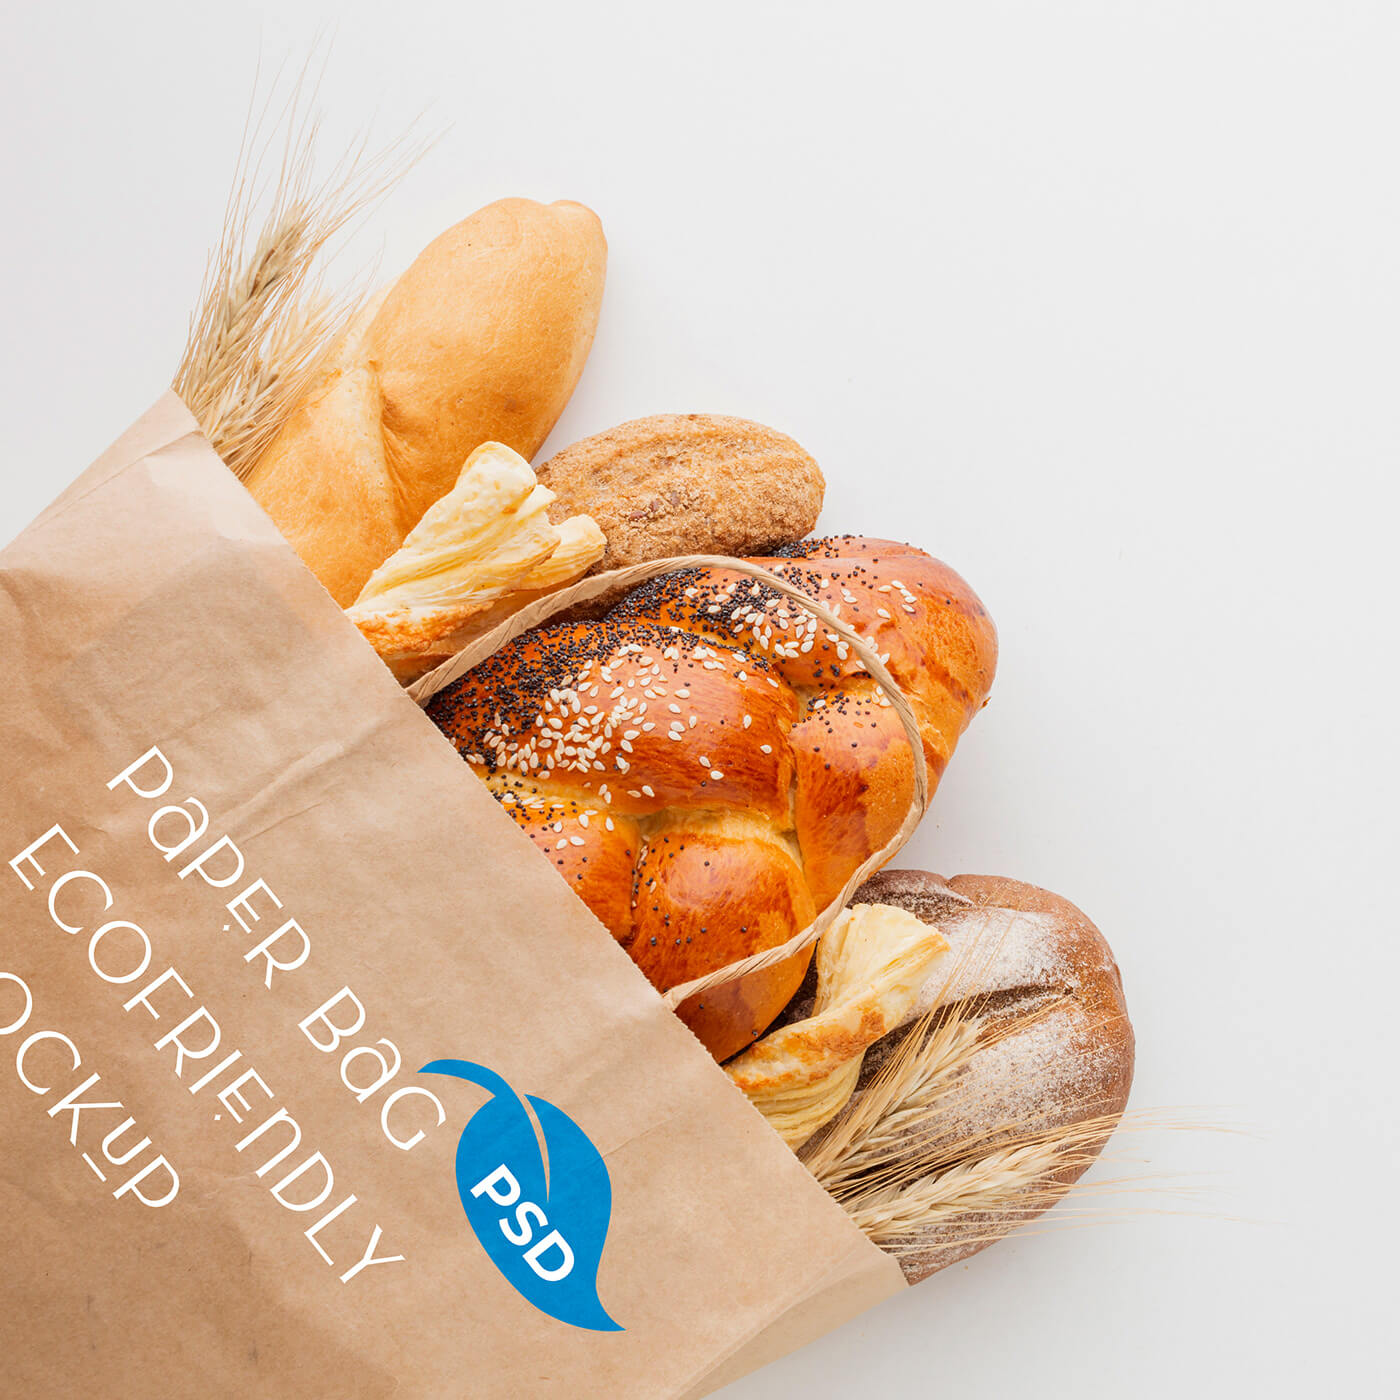 Freebies Mockups: Paper Bags With Breads Free Download